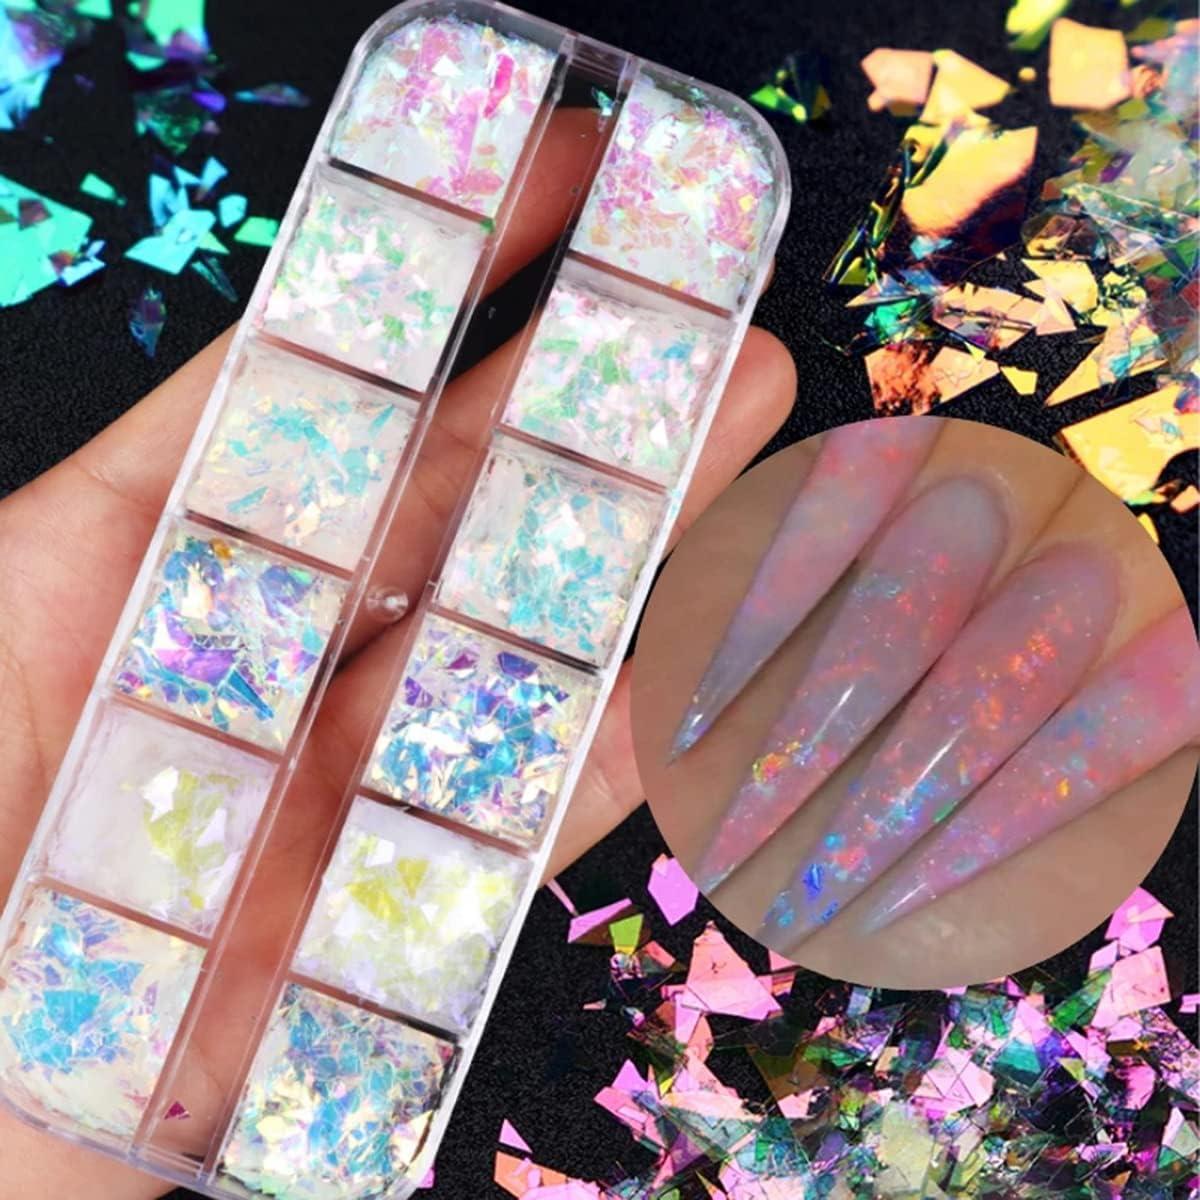 Holographic Nail Foil Flakes, 12 Grids Nail Foil Glitter Flakes Irregular  Nail Art Glitter Sequins for Acrylic Nails Design